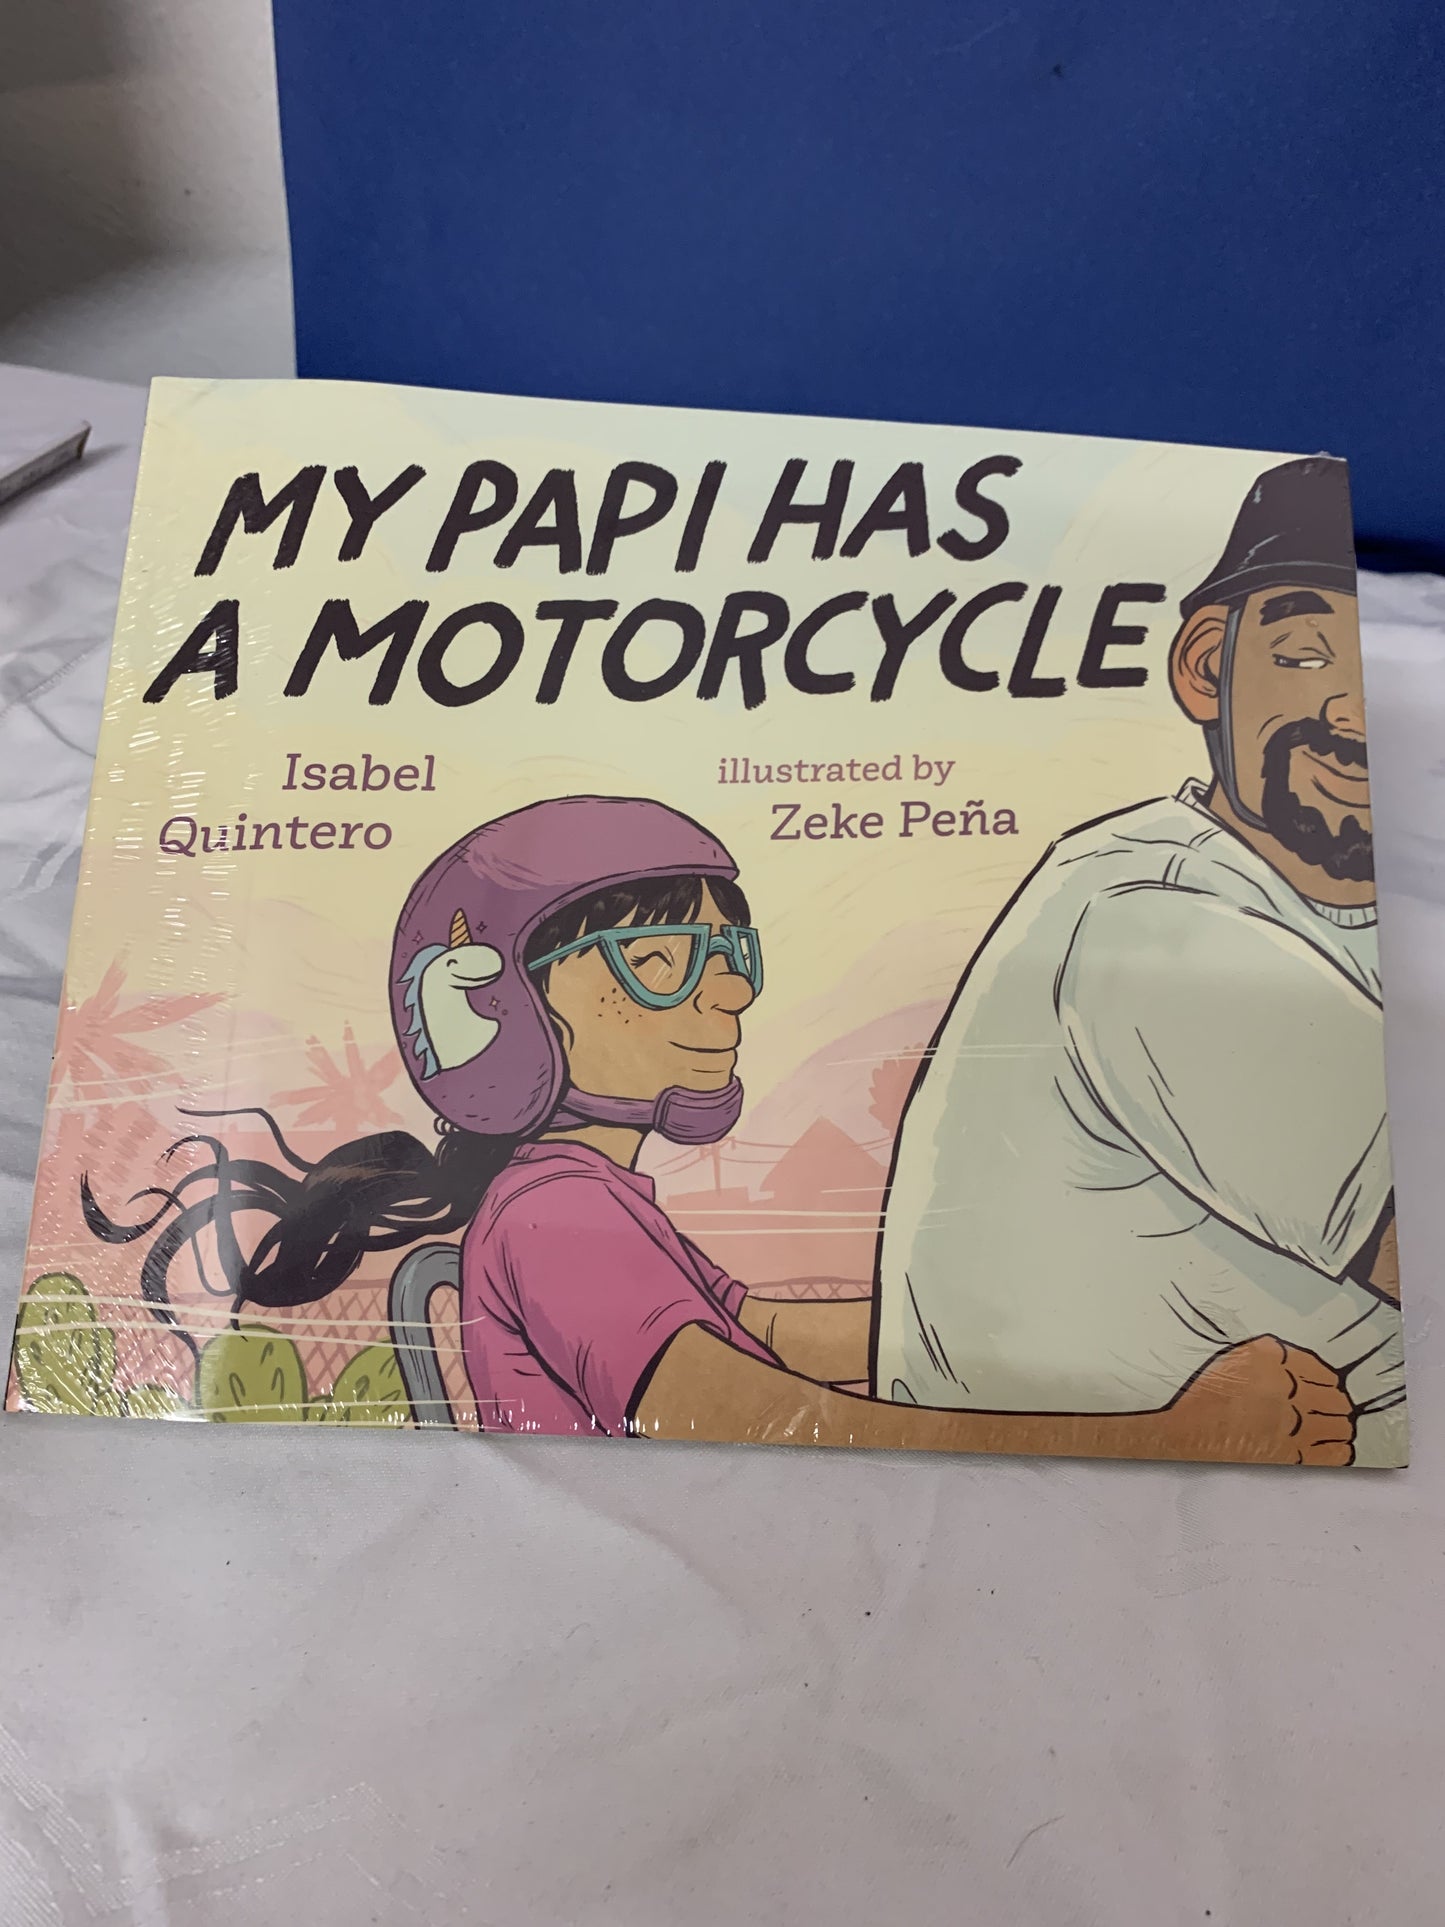 My Papi has a Motorcycle